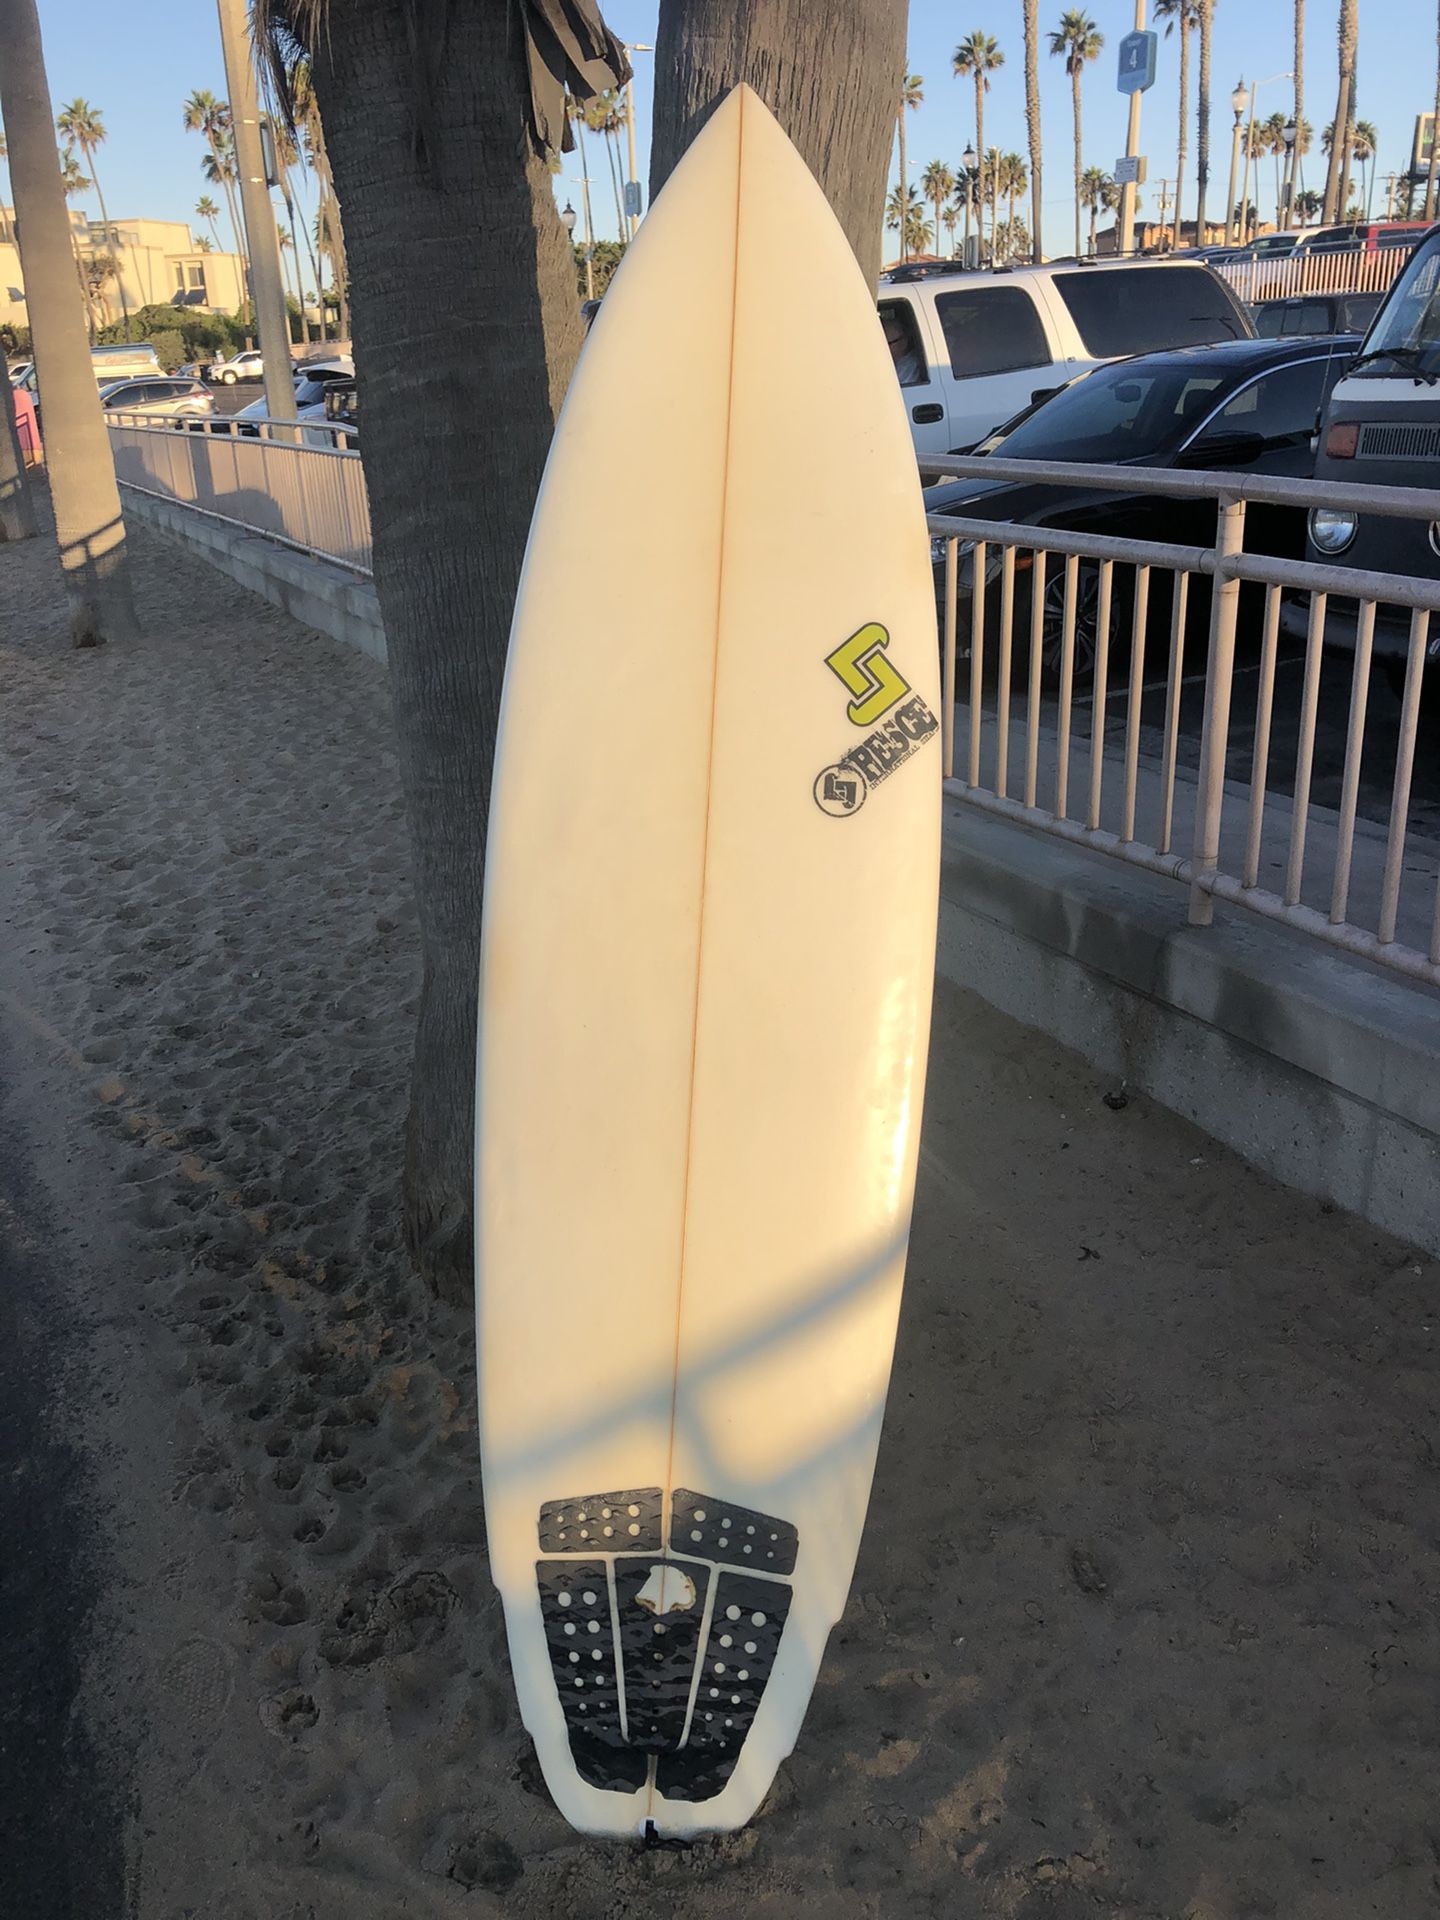 Surfboard For Sale. $295